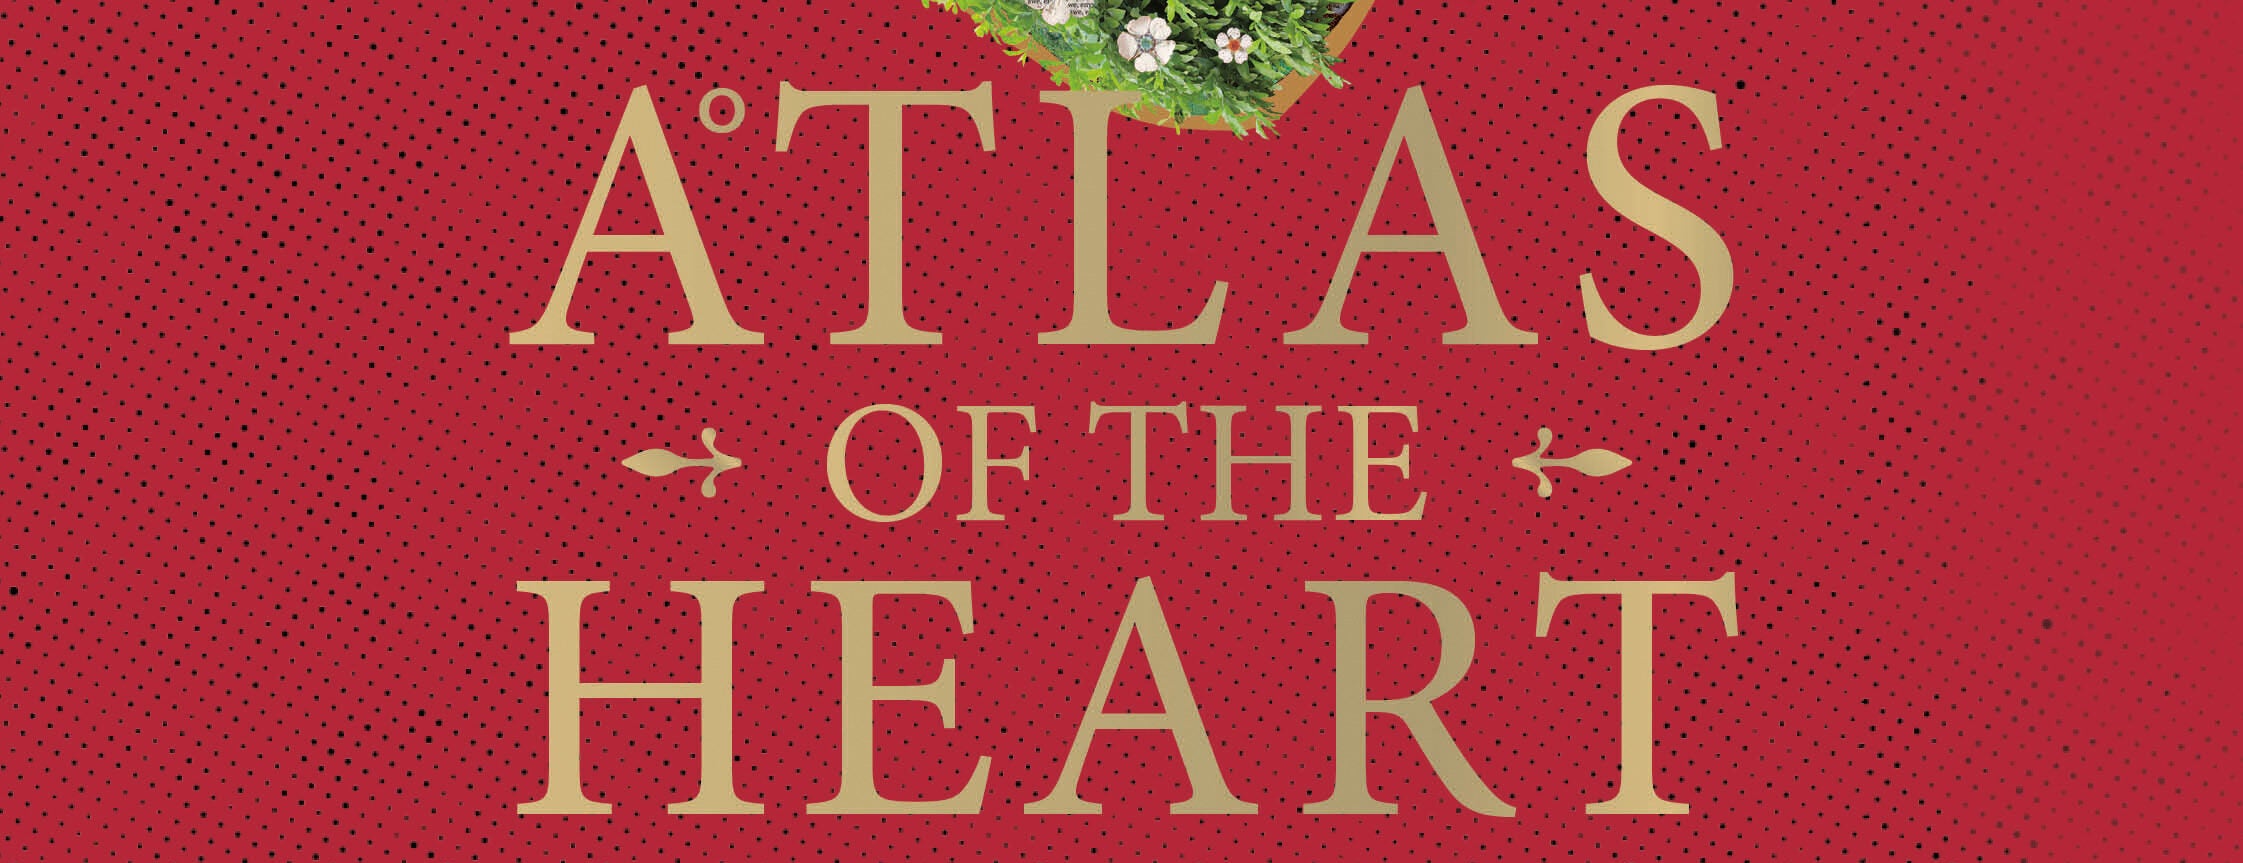 ATLAS OF THE HEART by Dr. Brené Brown Hits Shelves This November